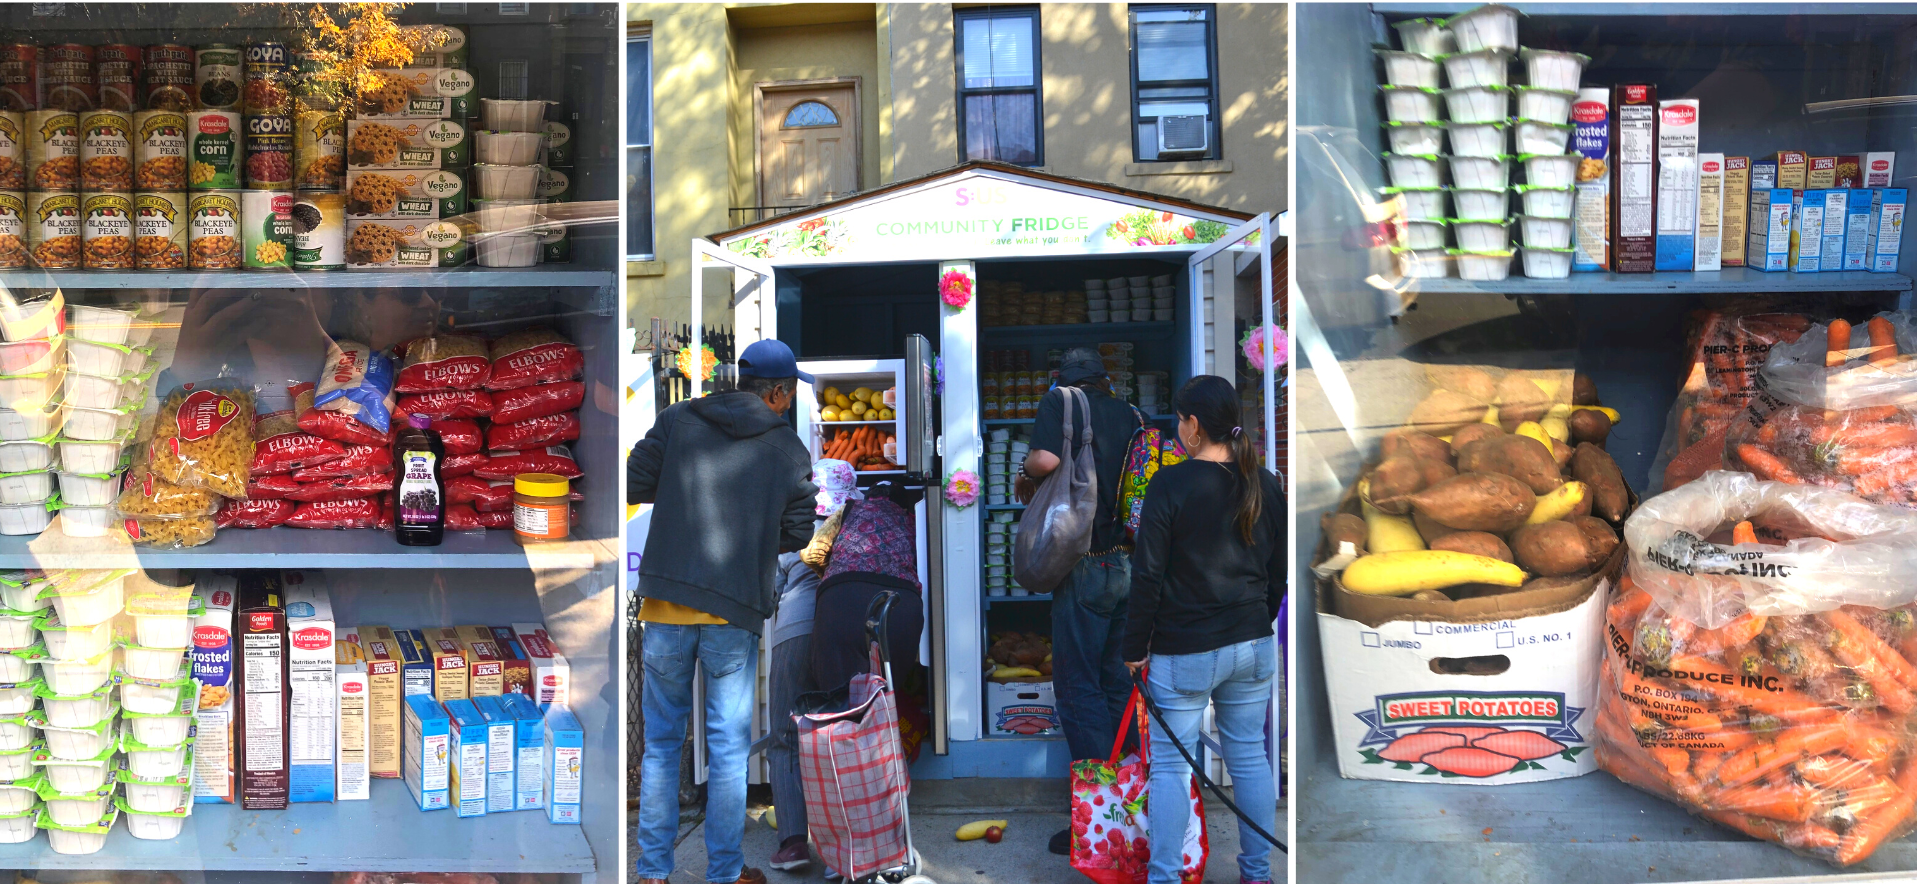 S:US’ Community Fridge Project: Cultivating Social Justice and Health Equity in Our Community